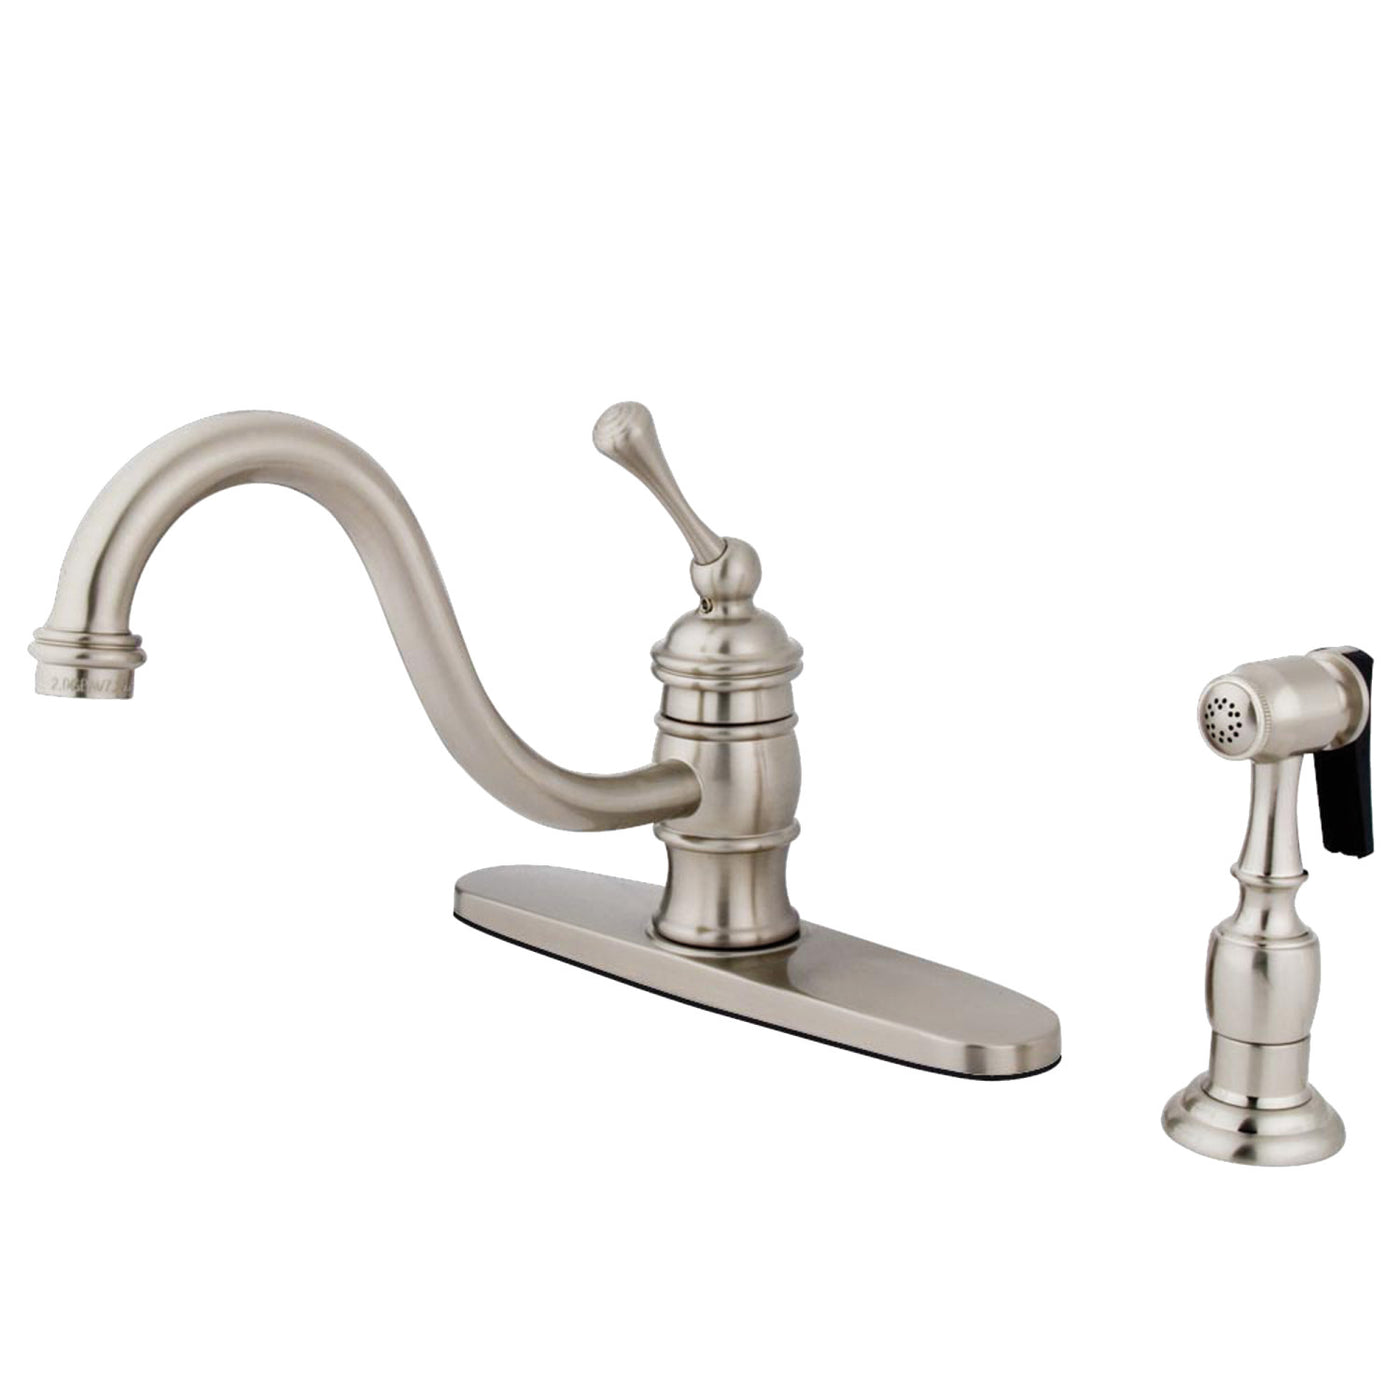 Elements of Design EB3578BLBS Single-Handle Kitchen Faucet with Brass Sprayer, Brushed Nickel